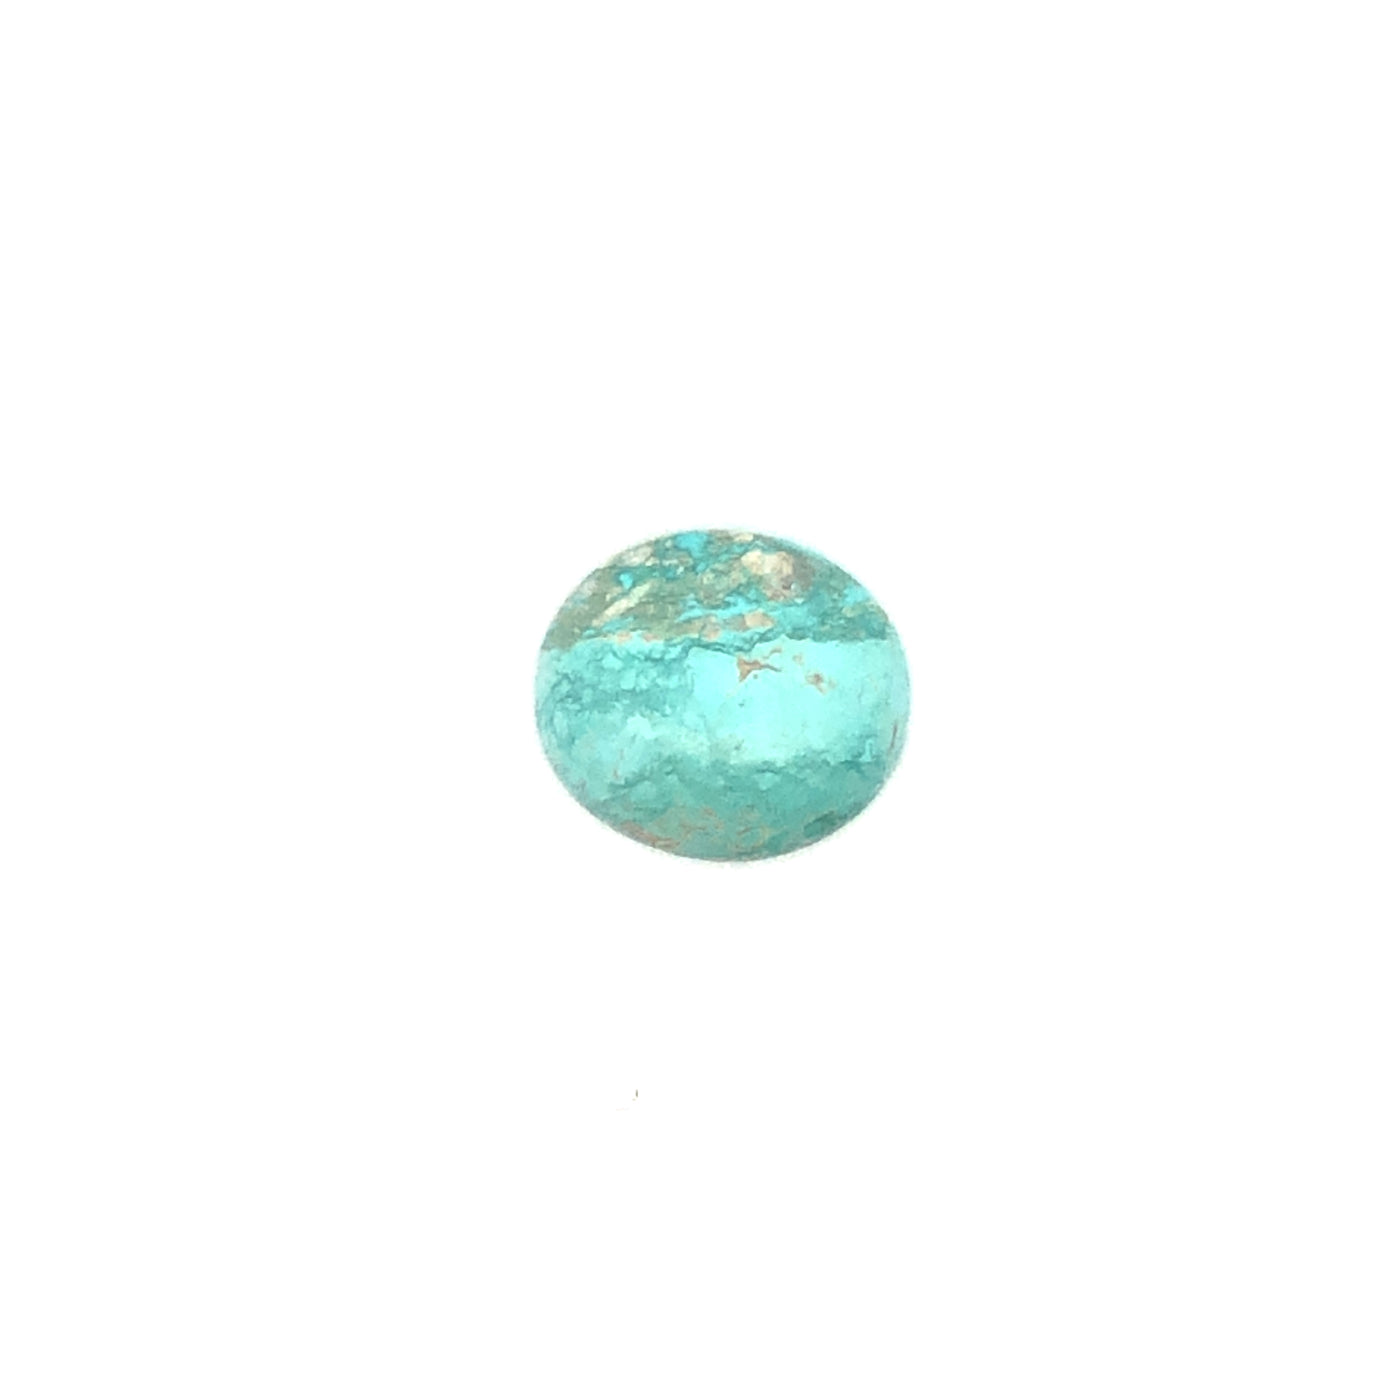 Loose Narooma Turquoise Oval Shaped 10.16Ct Blue With Some White